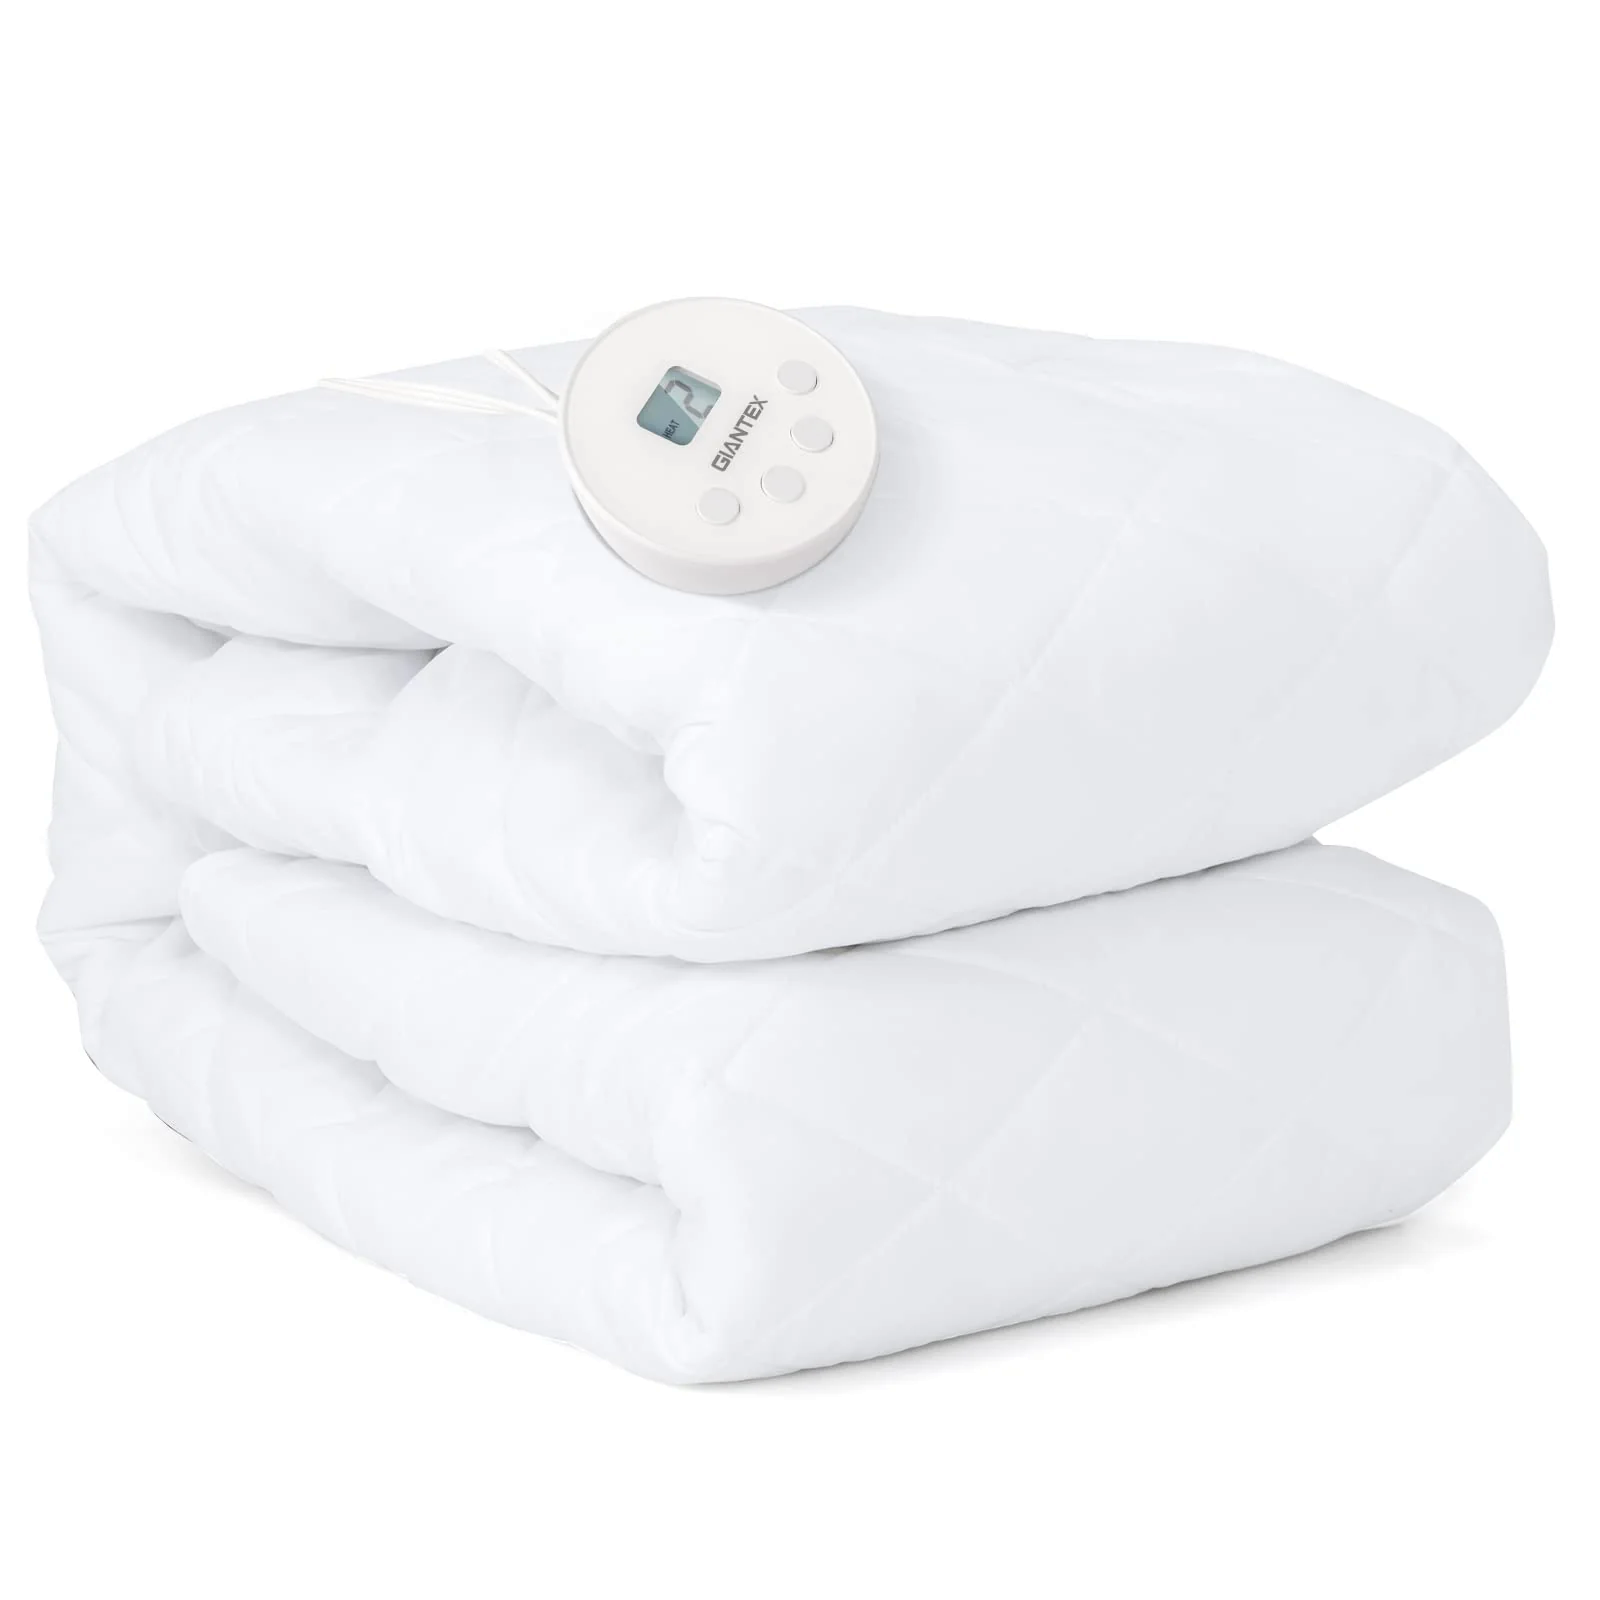 Precautions for Electric Heated Mattress Pad Use